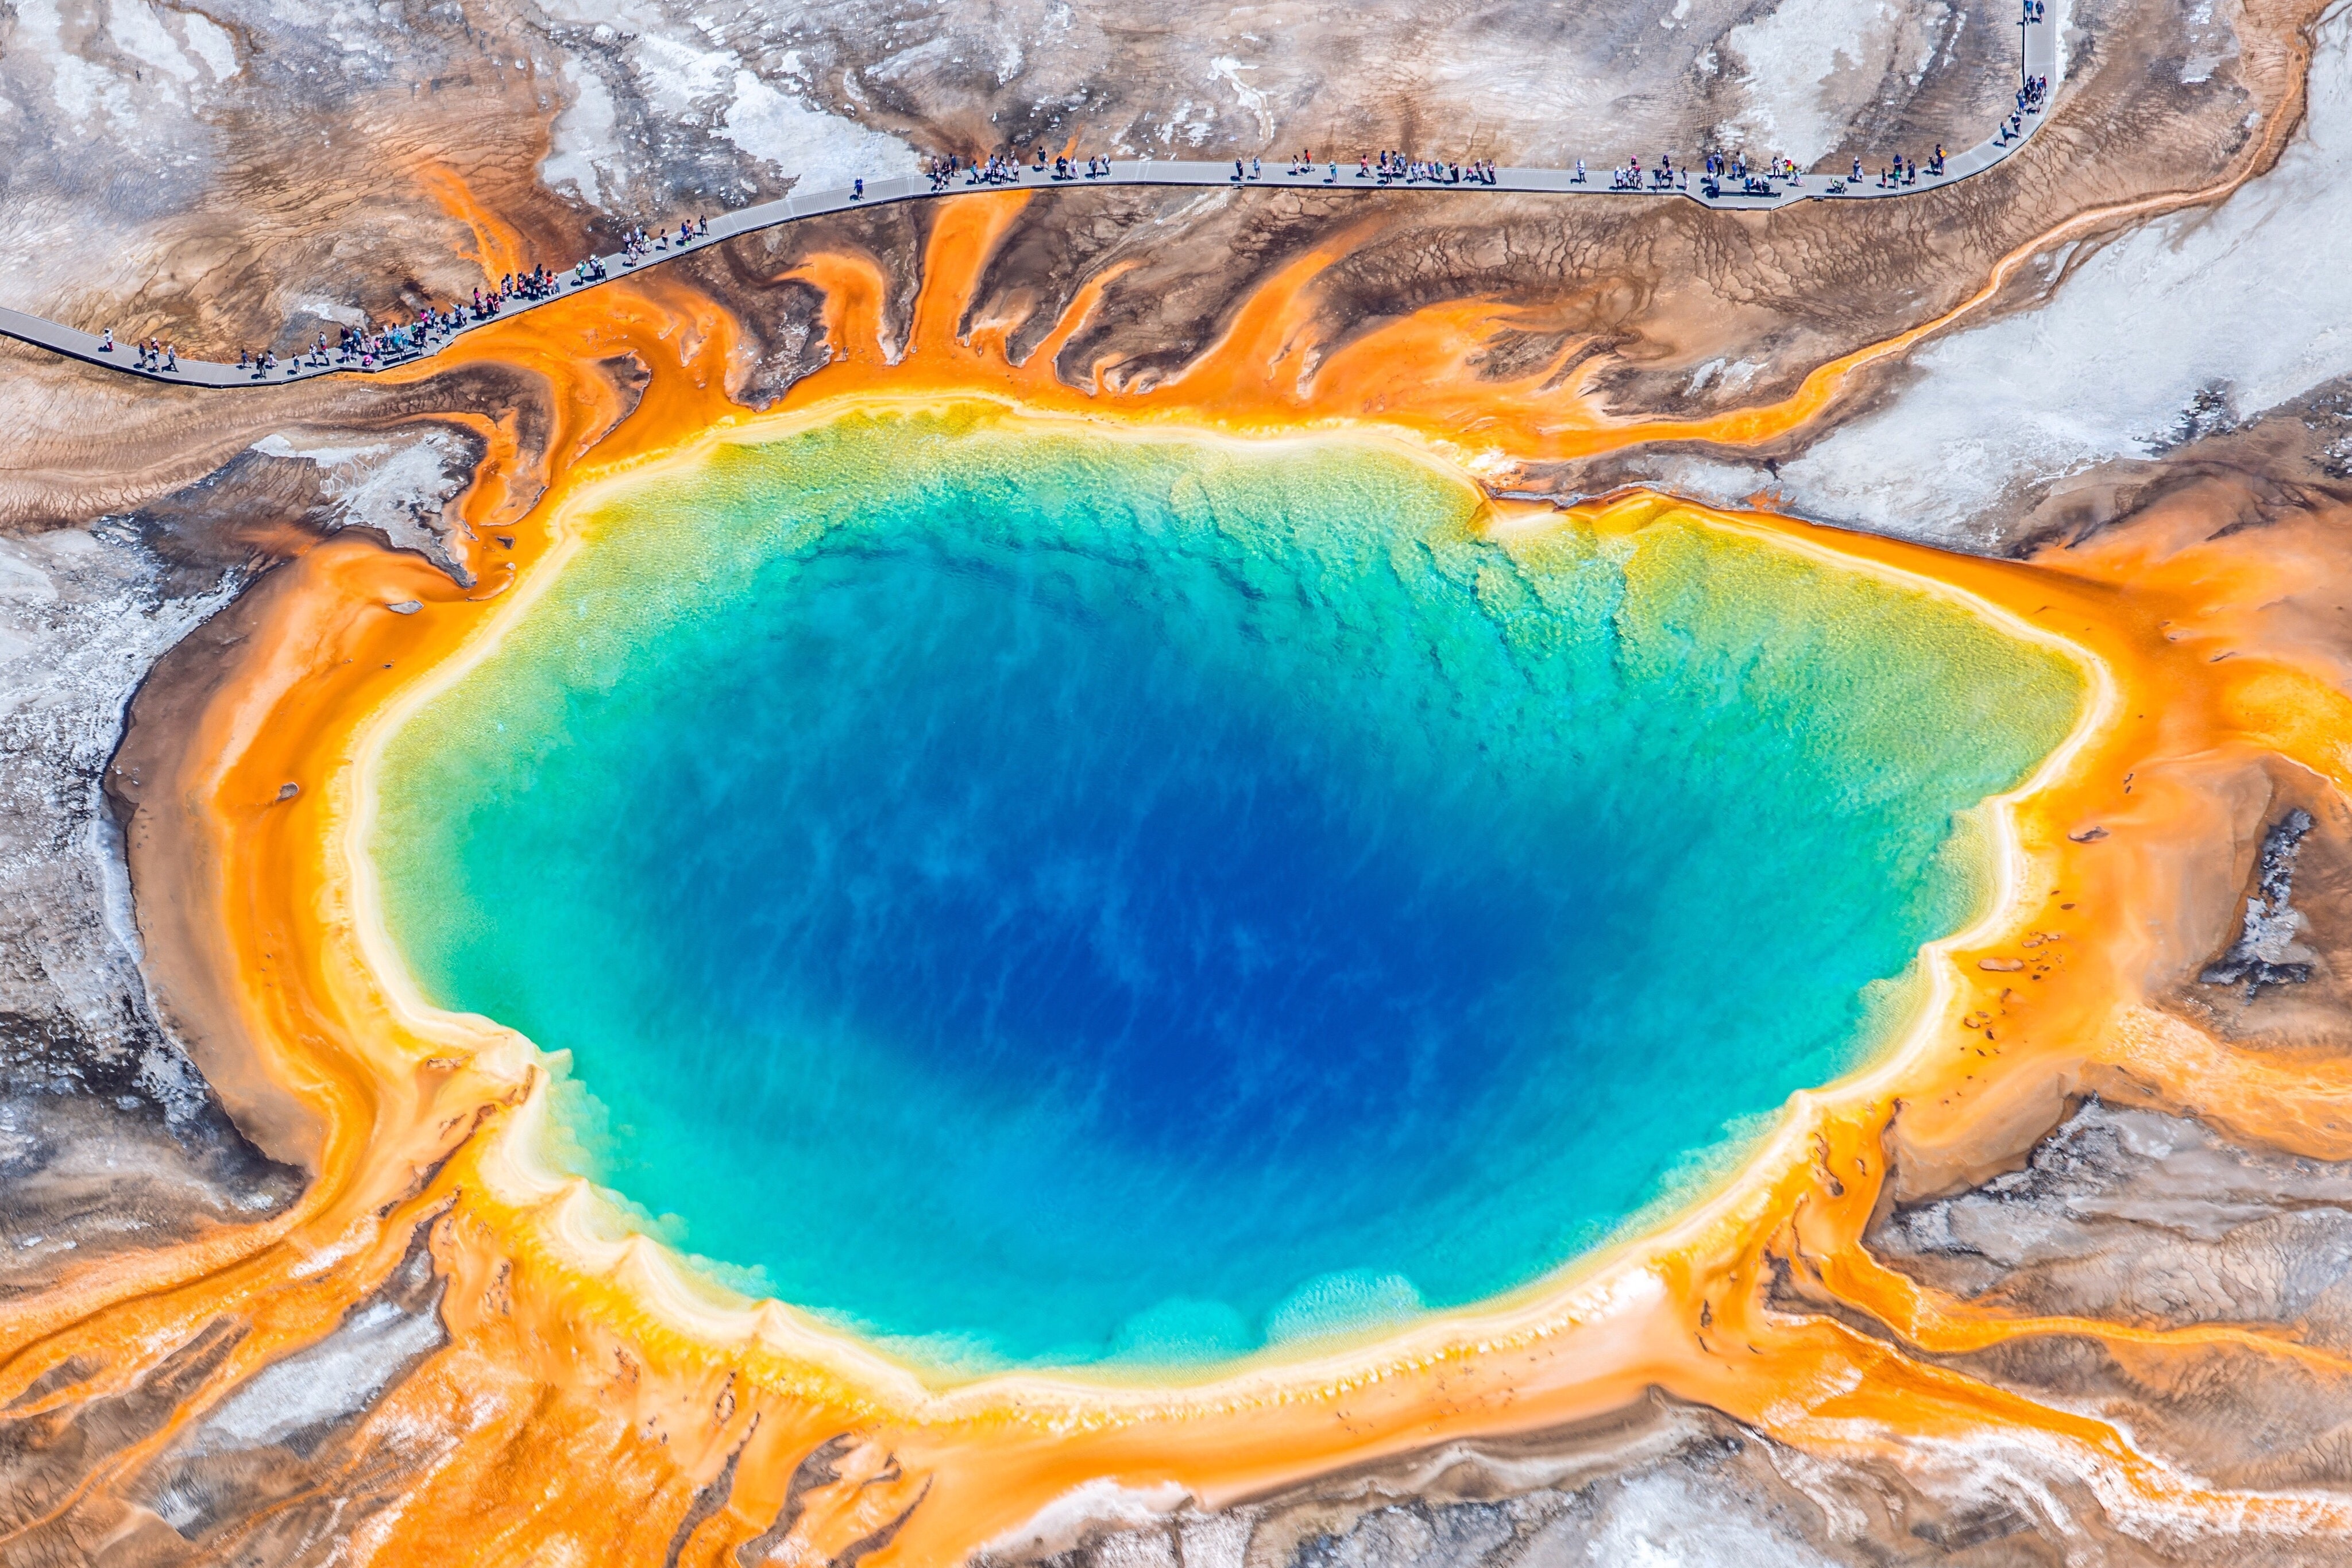 Yellowstone National Park Guide: Everything to Know Before Your Trip. Condé Nast Traveler